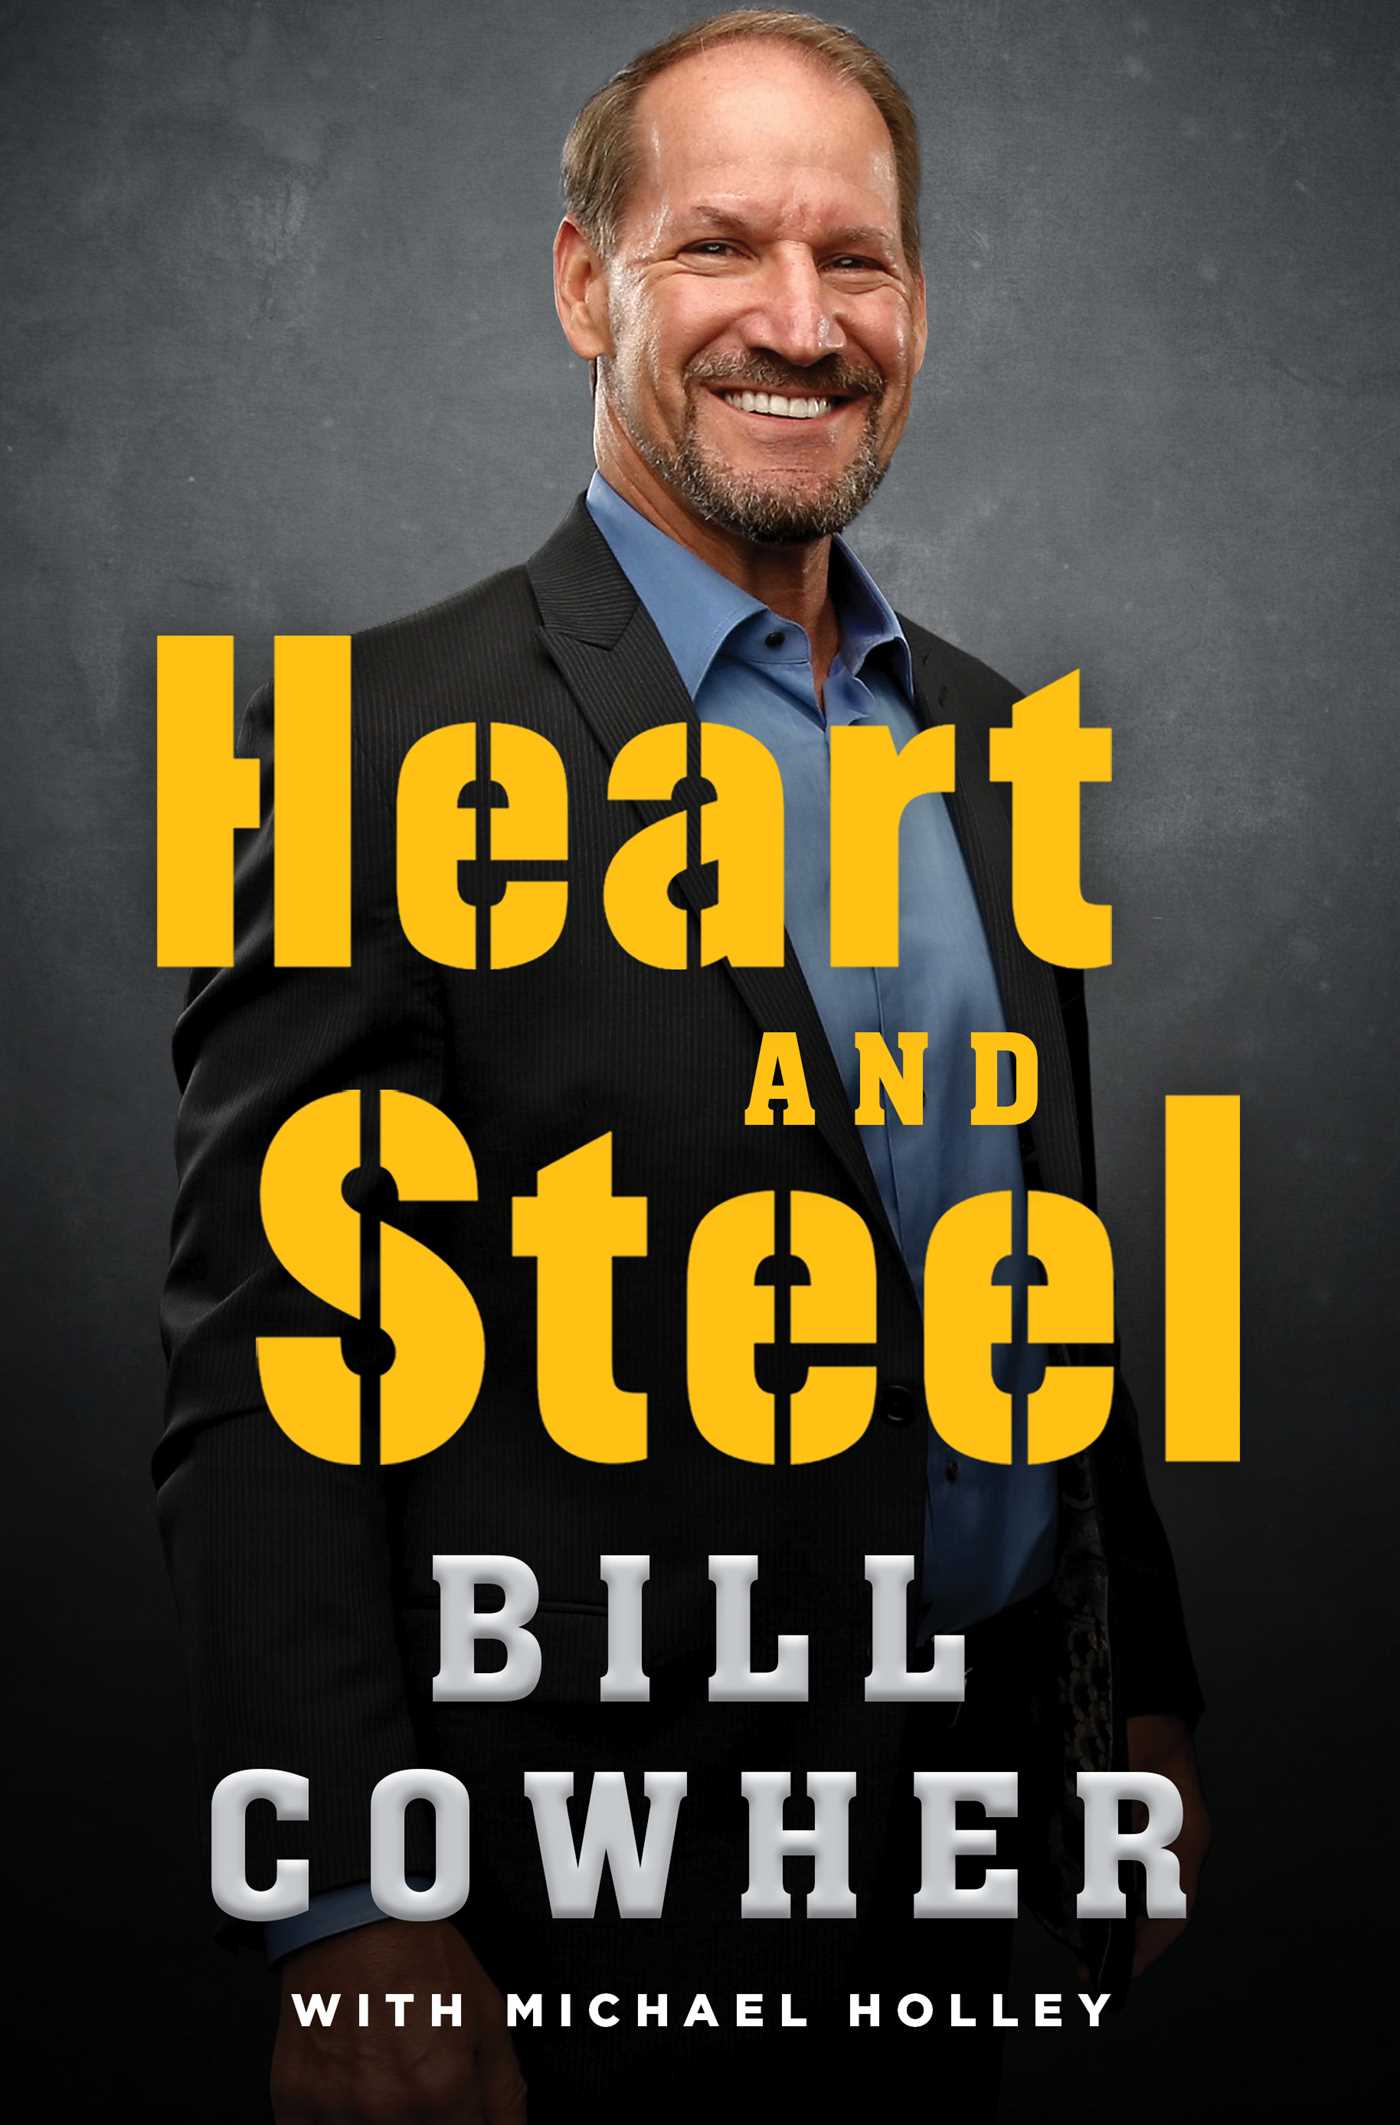 Image for "Heart and Steel"